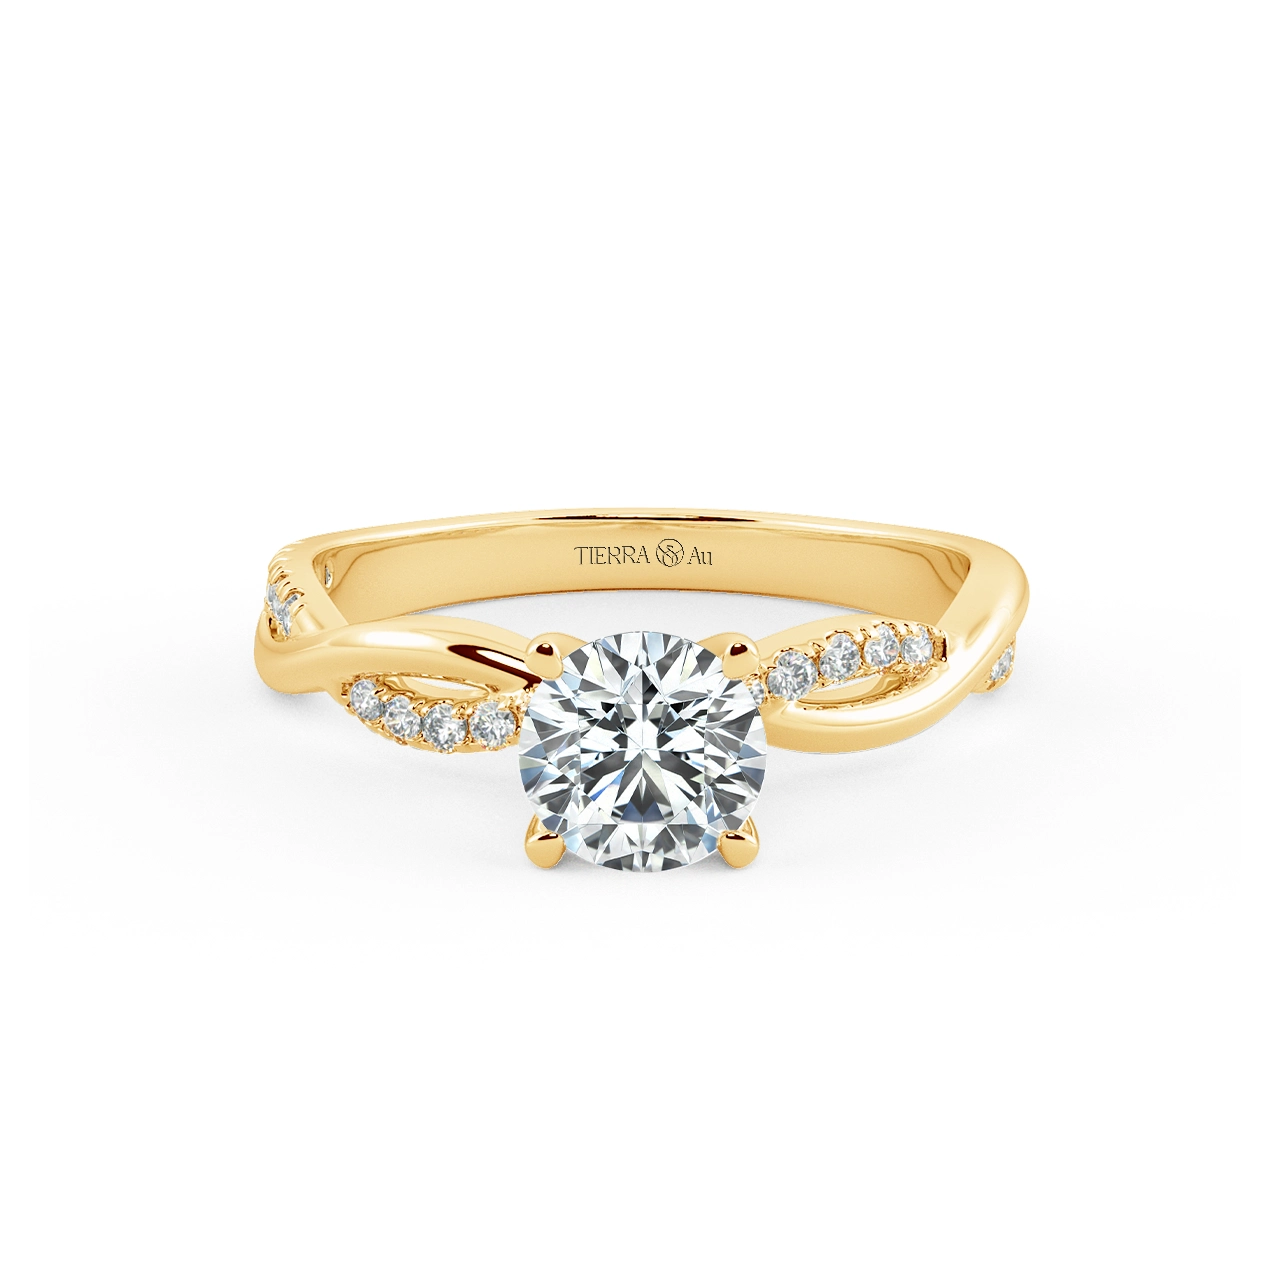 Twiss Engagement Ring with Eternity Band NCH1701 1